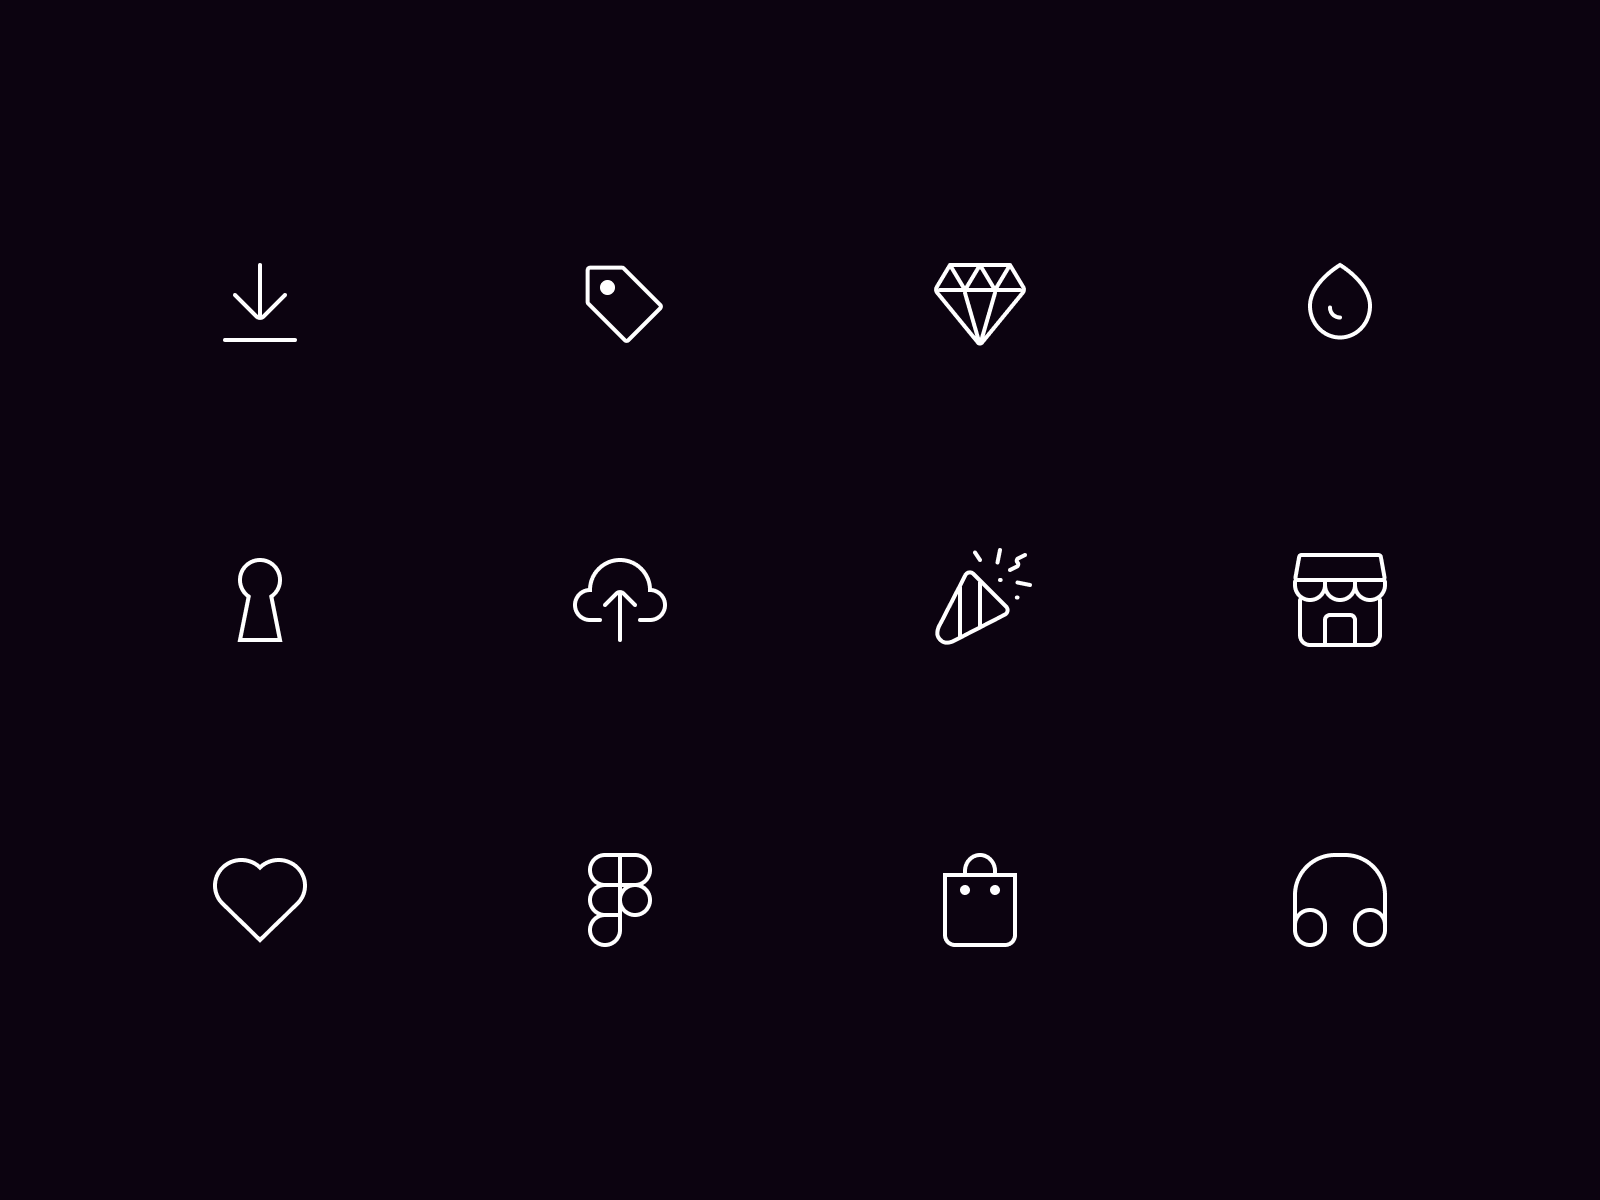 Icons - Keyicons Set by nodos on Dribbble